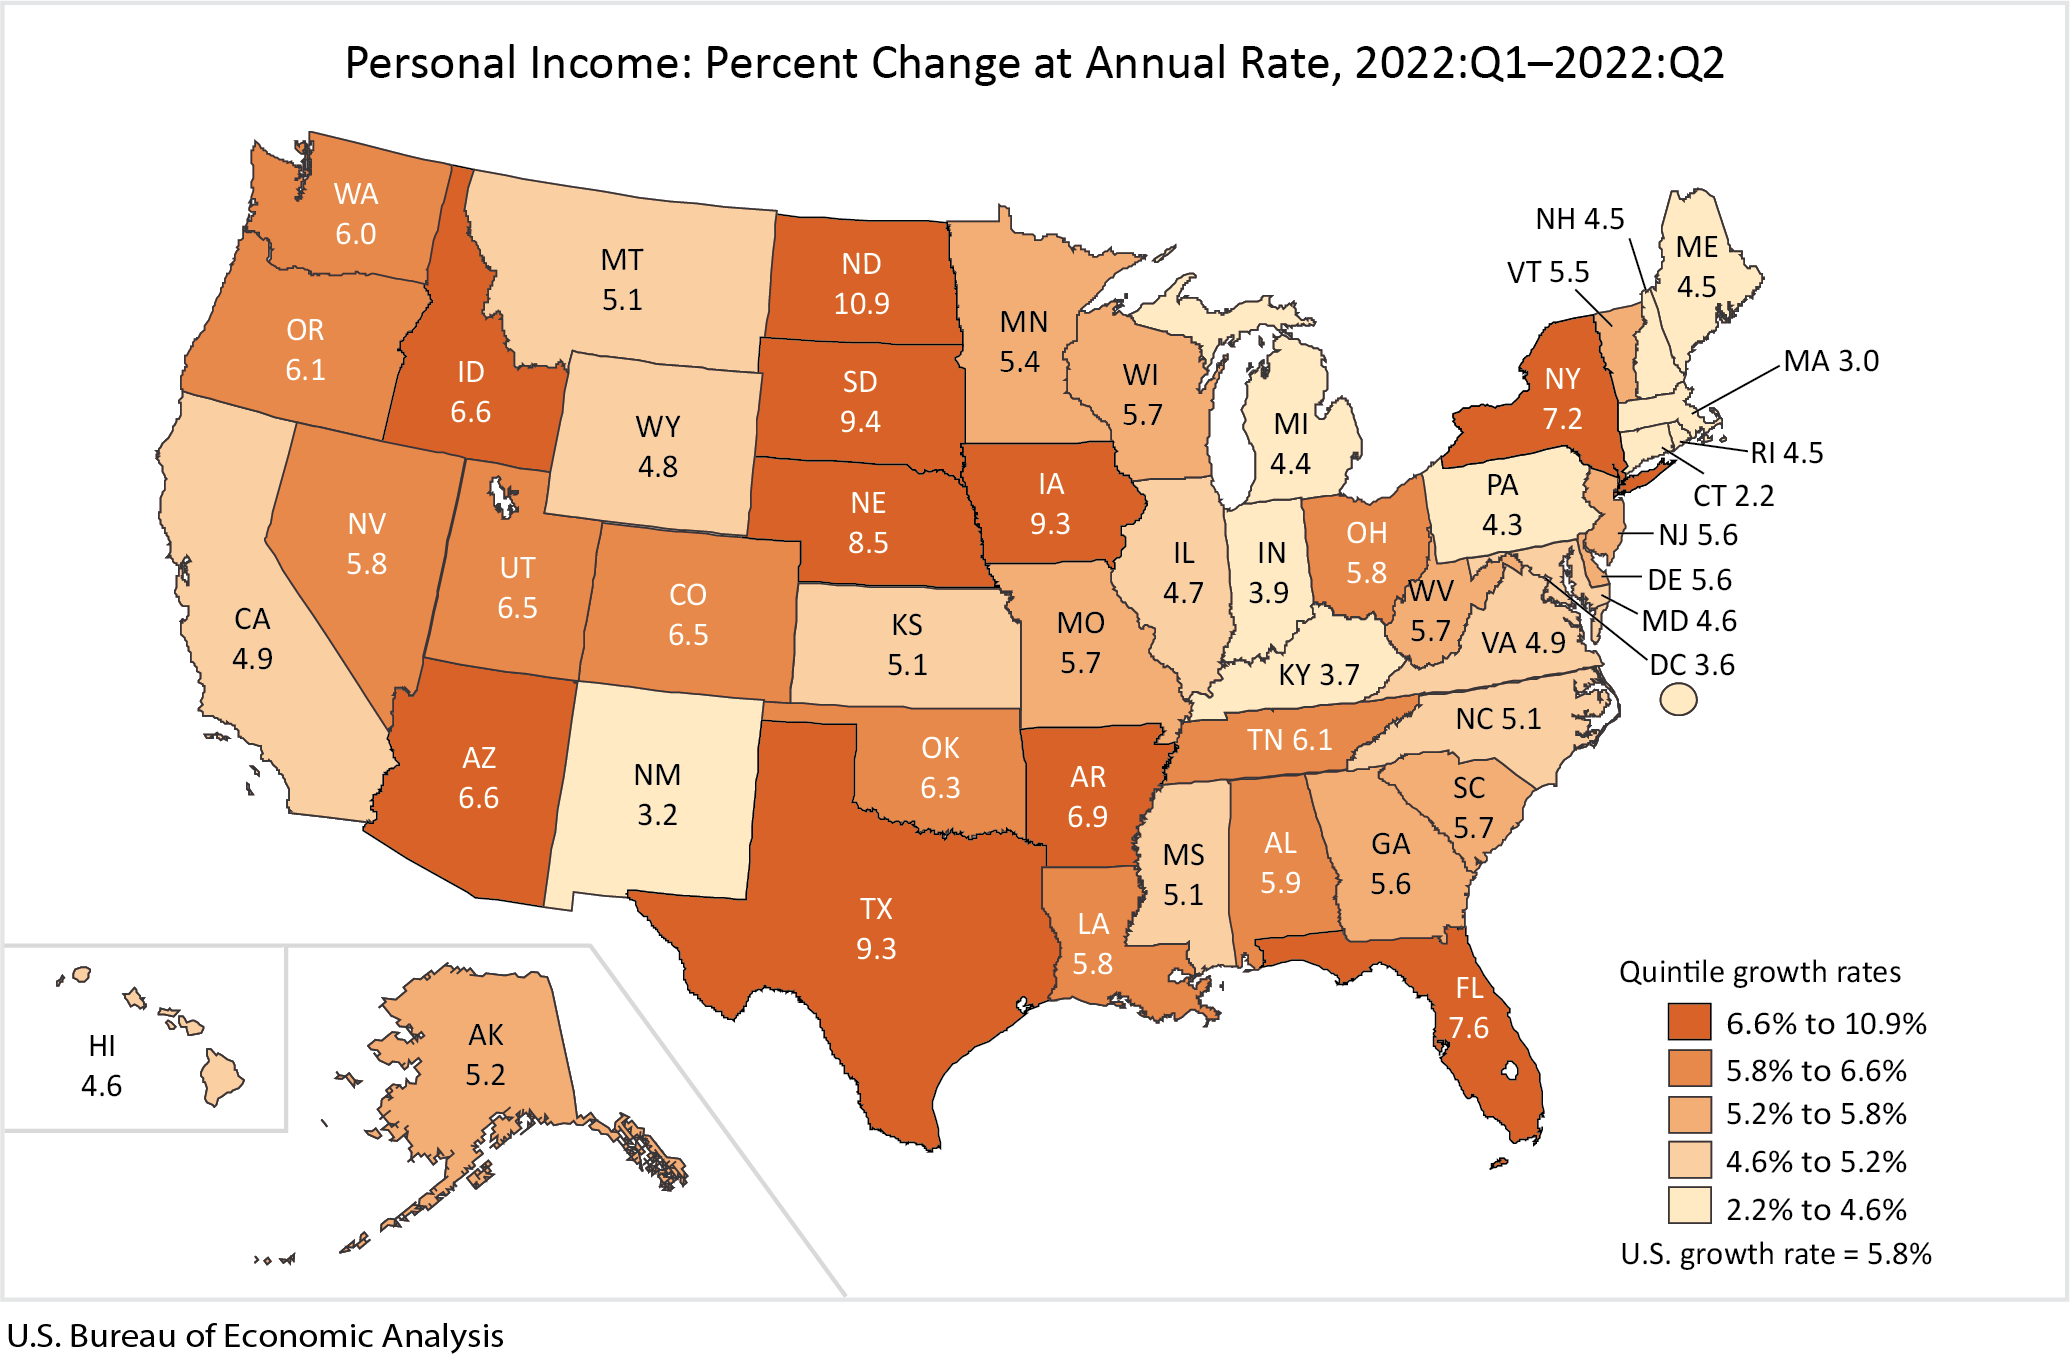 Personal Income: Percent Change at Annual Rate, 2022:Q1-2022:Q2